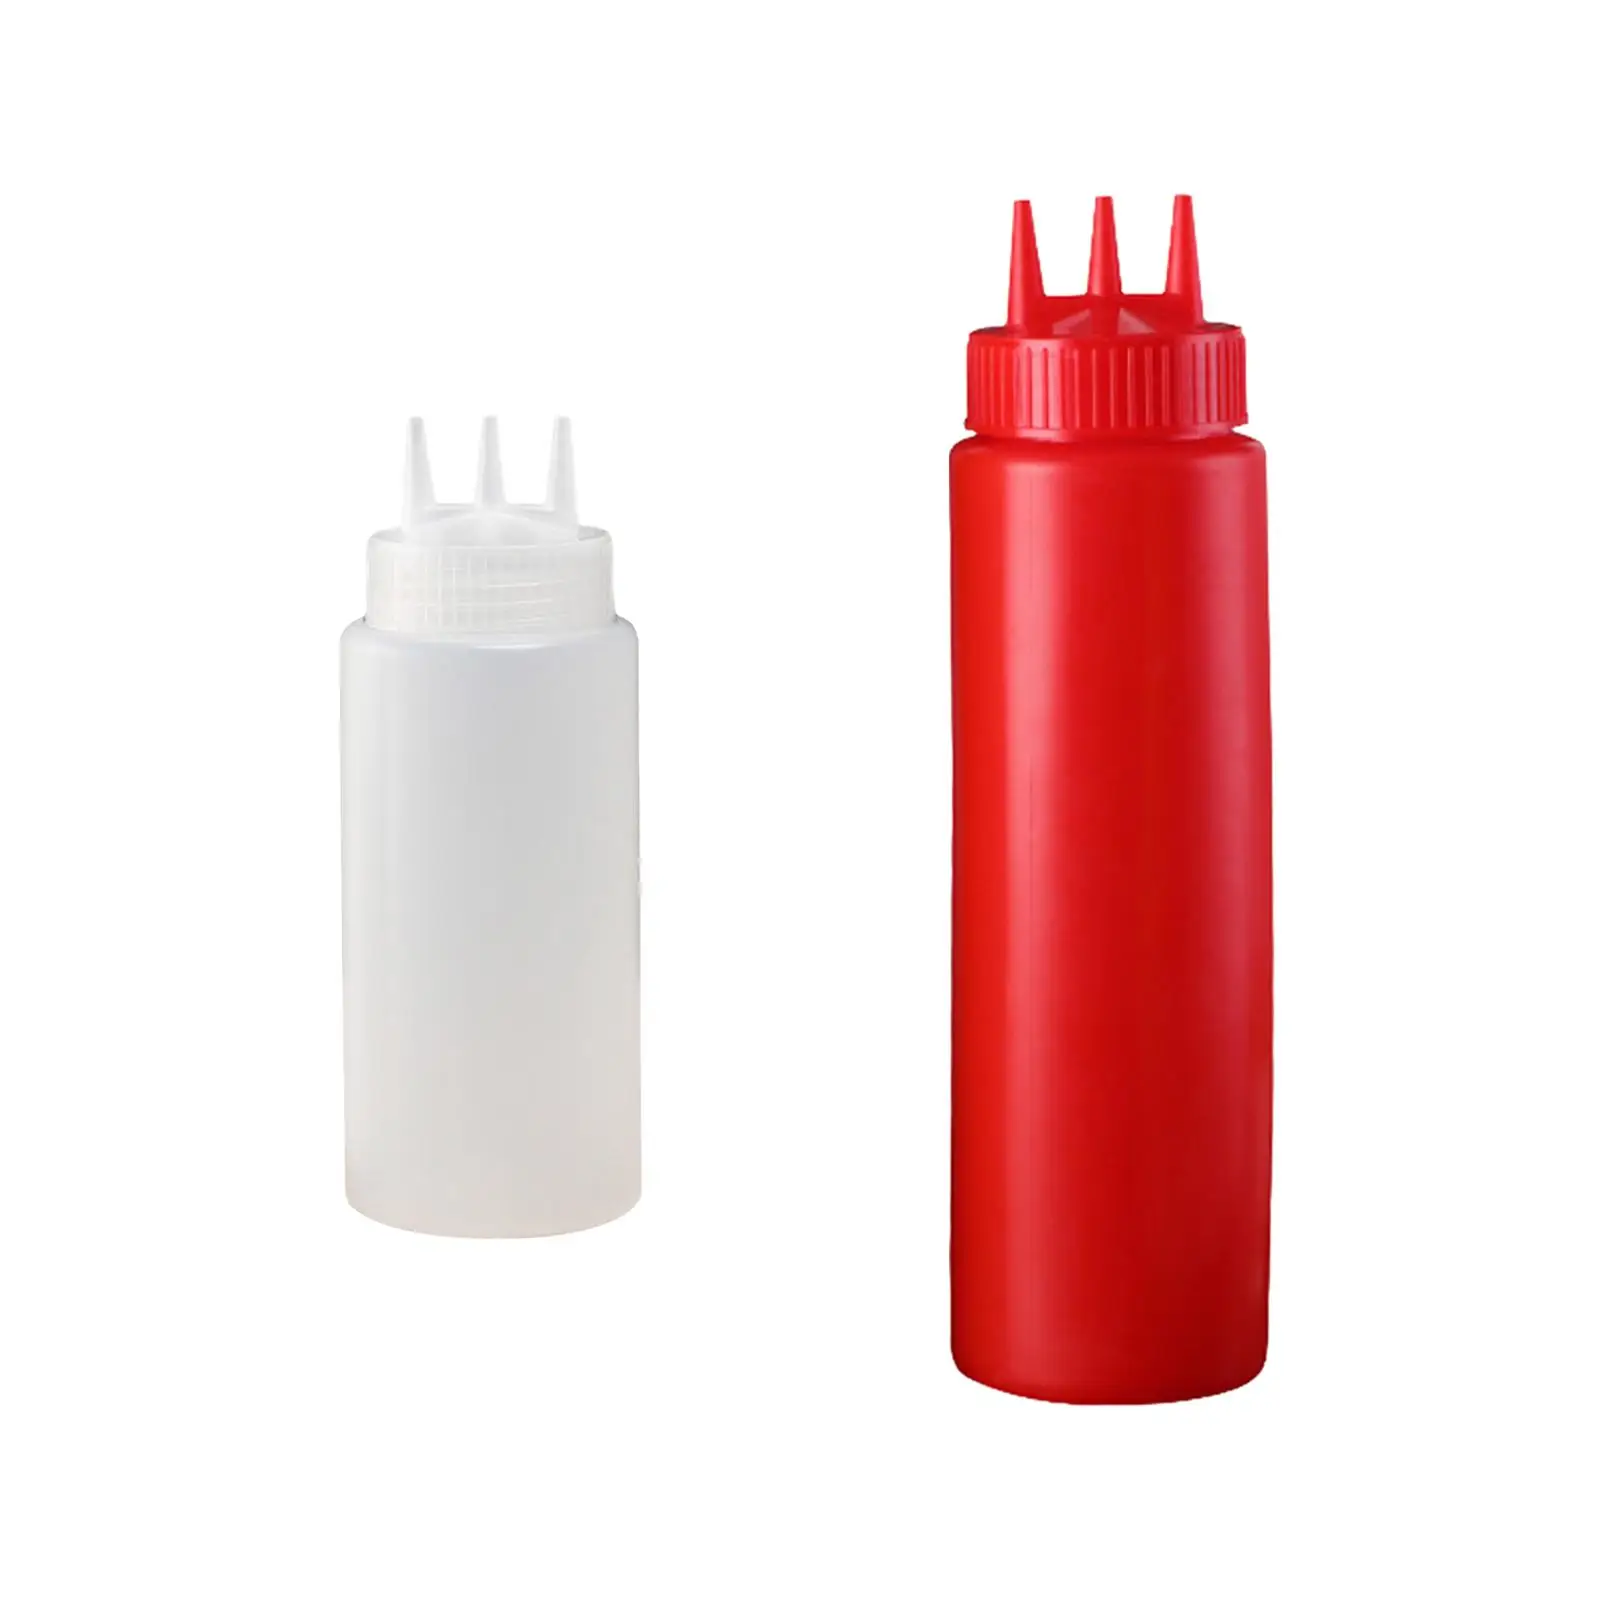 3 Hole Sauce Condiment Bottle Salad Dressing Bottle Squeezable Dispenser Bottle for Syrup Condiments Ketchup Sauces Camping